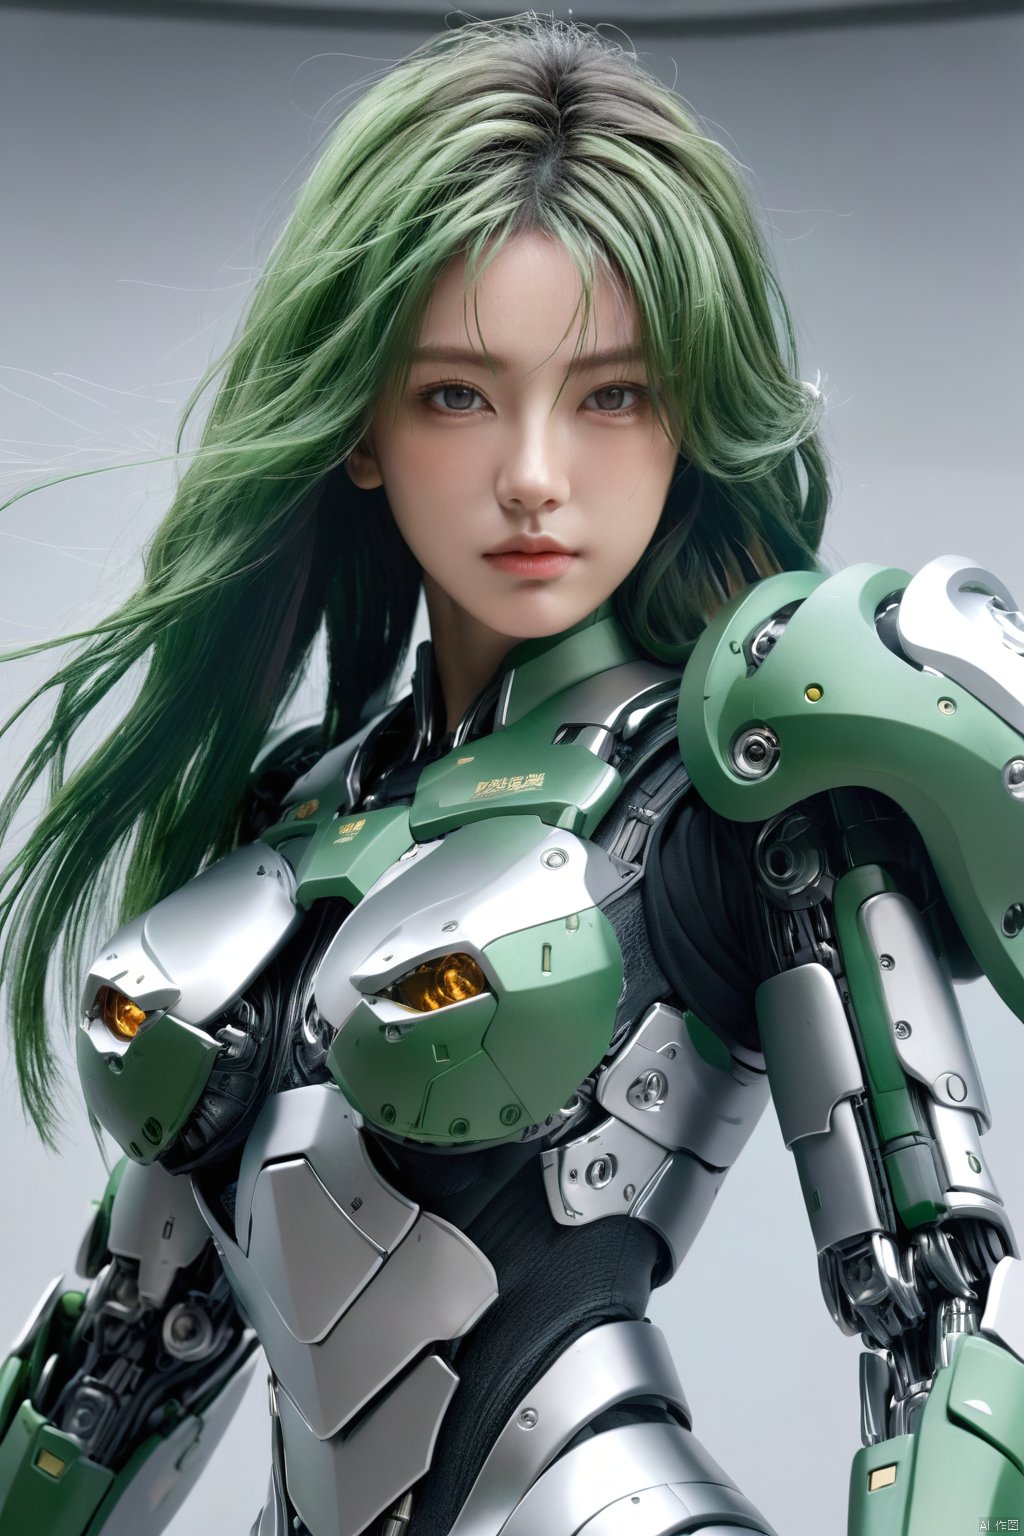  HUBG_Mecha_Armor,
1 girl, huge breasts, big chest,full body:1.5, messy green long hair, realistic, perfect murge, ,Mecha body,Young beauty spirit .Best Quality, photorealistic, ultra-detailed, finely detailed, high resolution, perfect dynamic composition, sharp-focus,b3rli,dongtan dress,